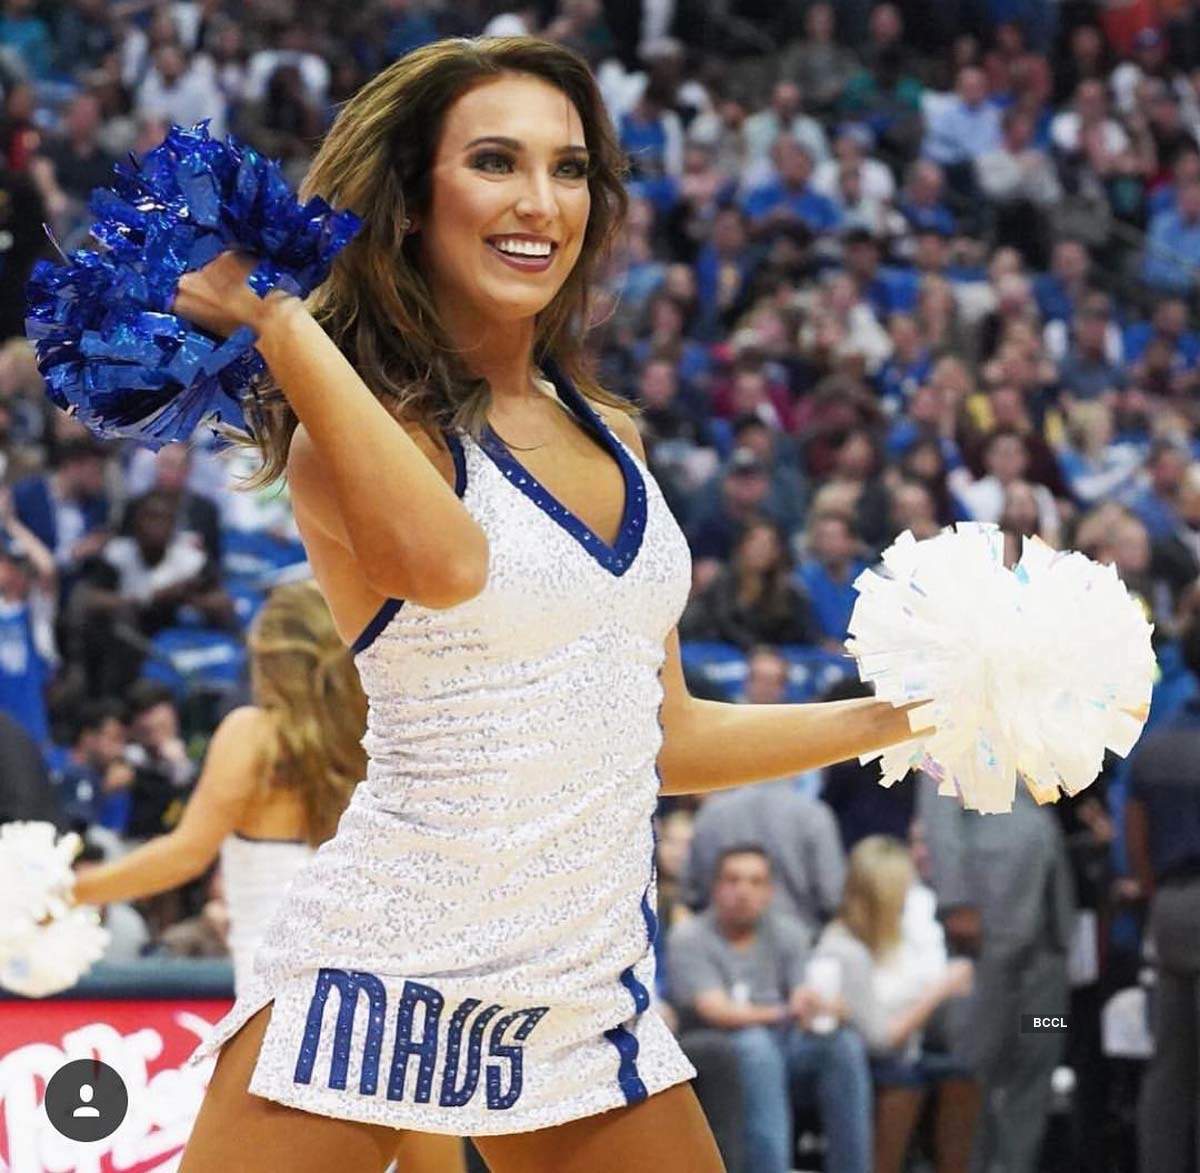 Stunning pictures of the most gorgeous basketball cheerleaders